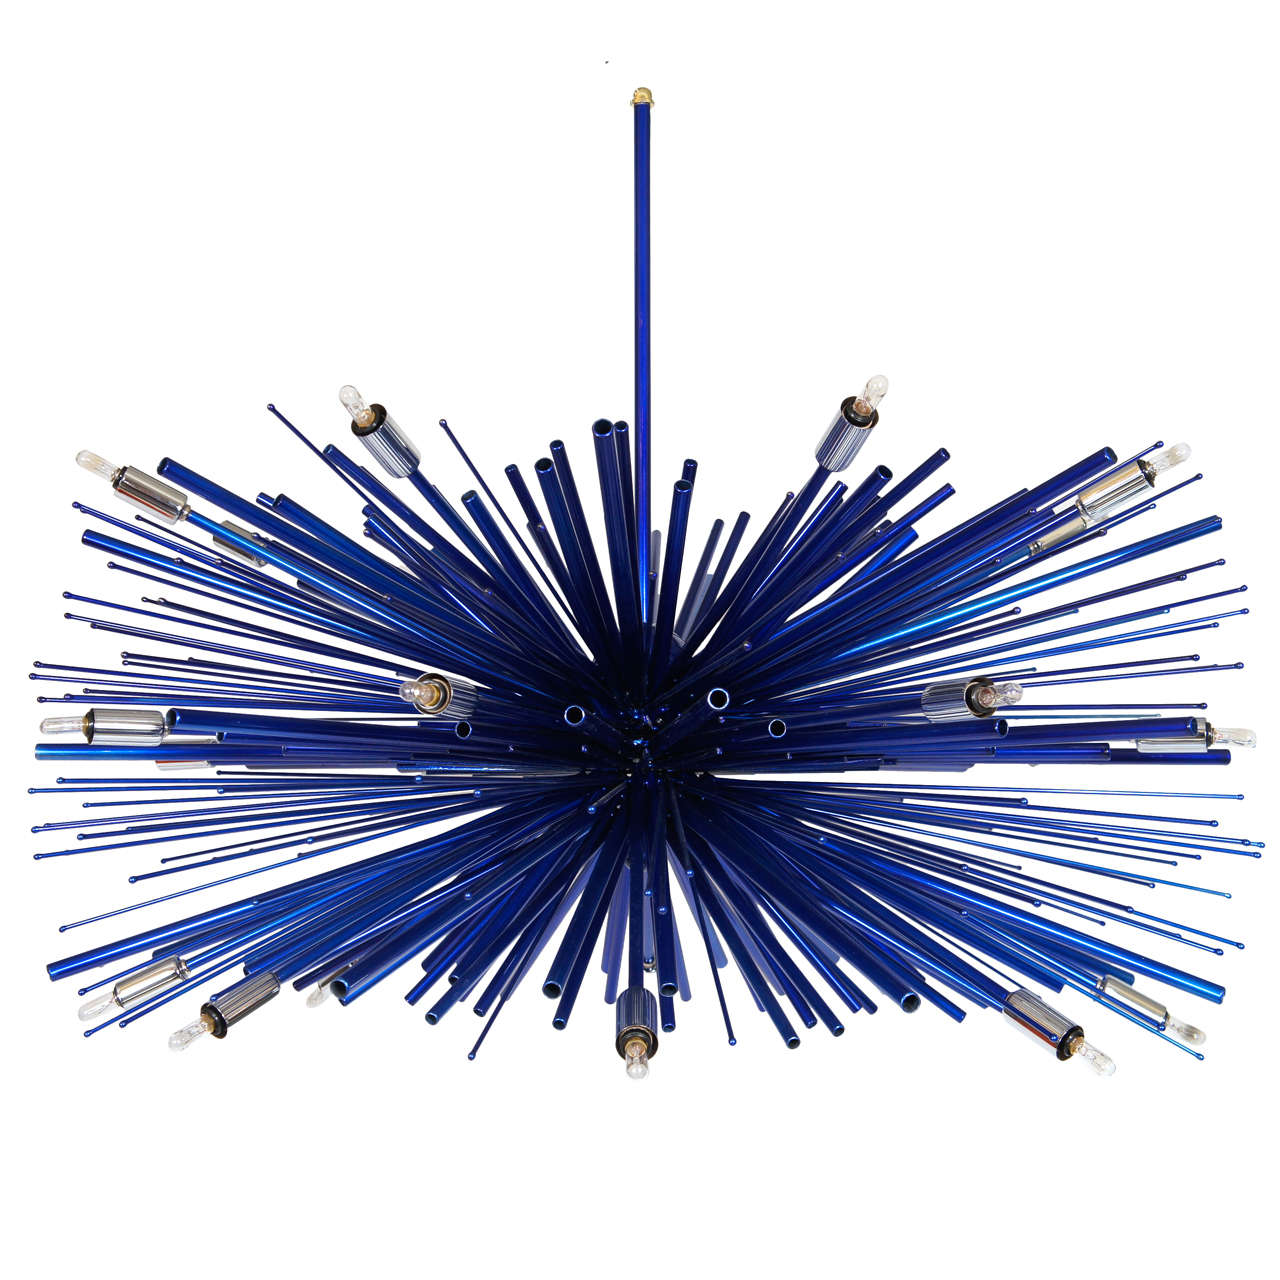  Custom Supernova "Electric Blue" Chandelier with 24 Lights, made in the USA For Sale